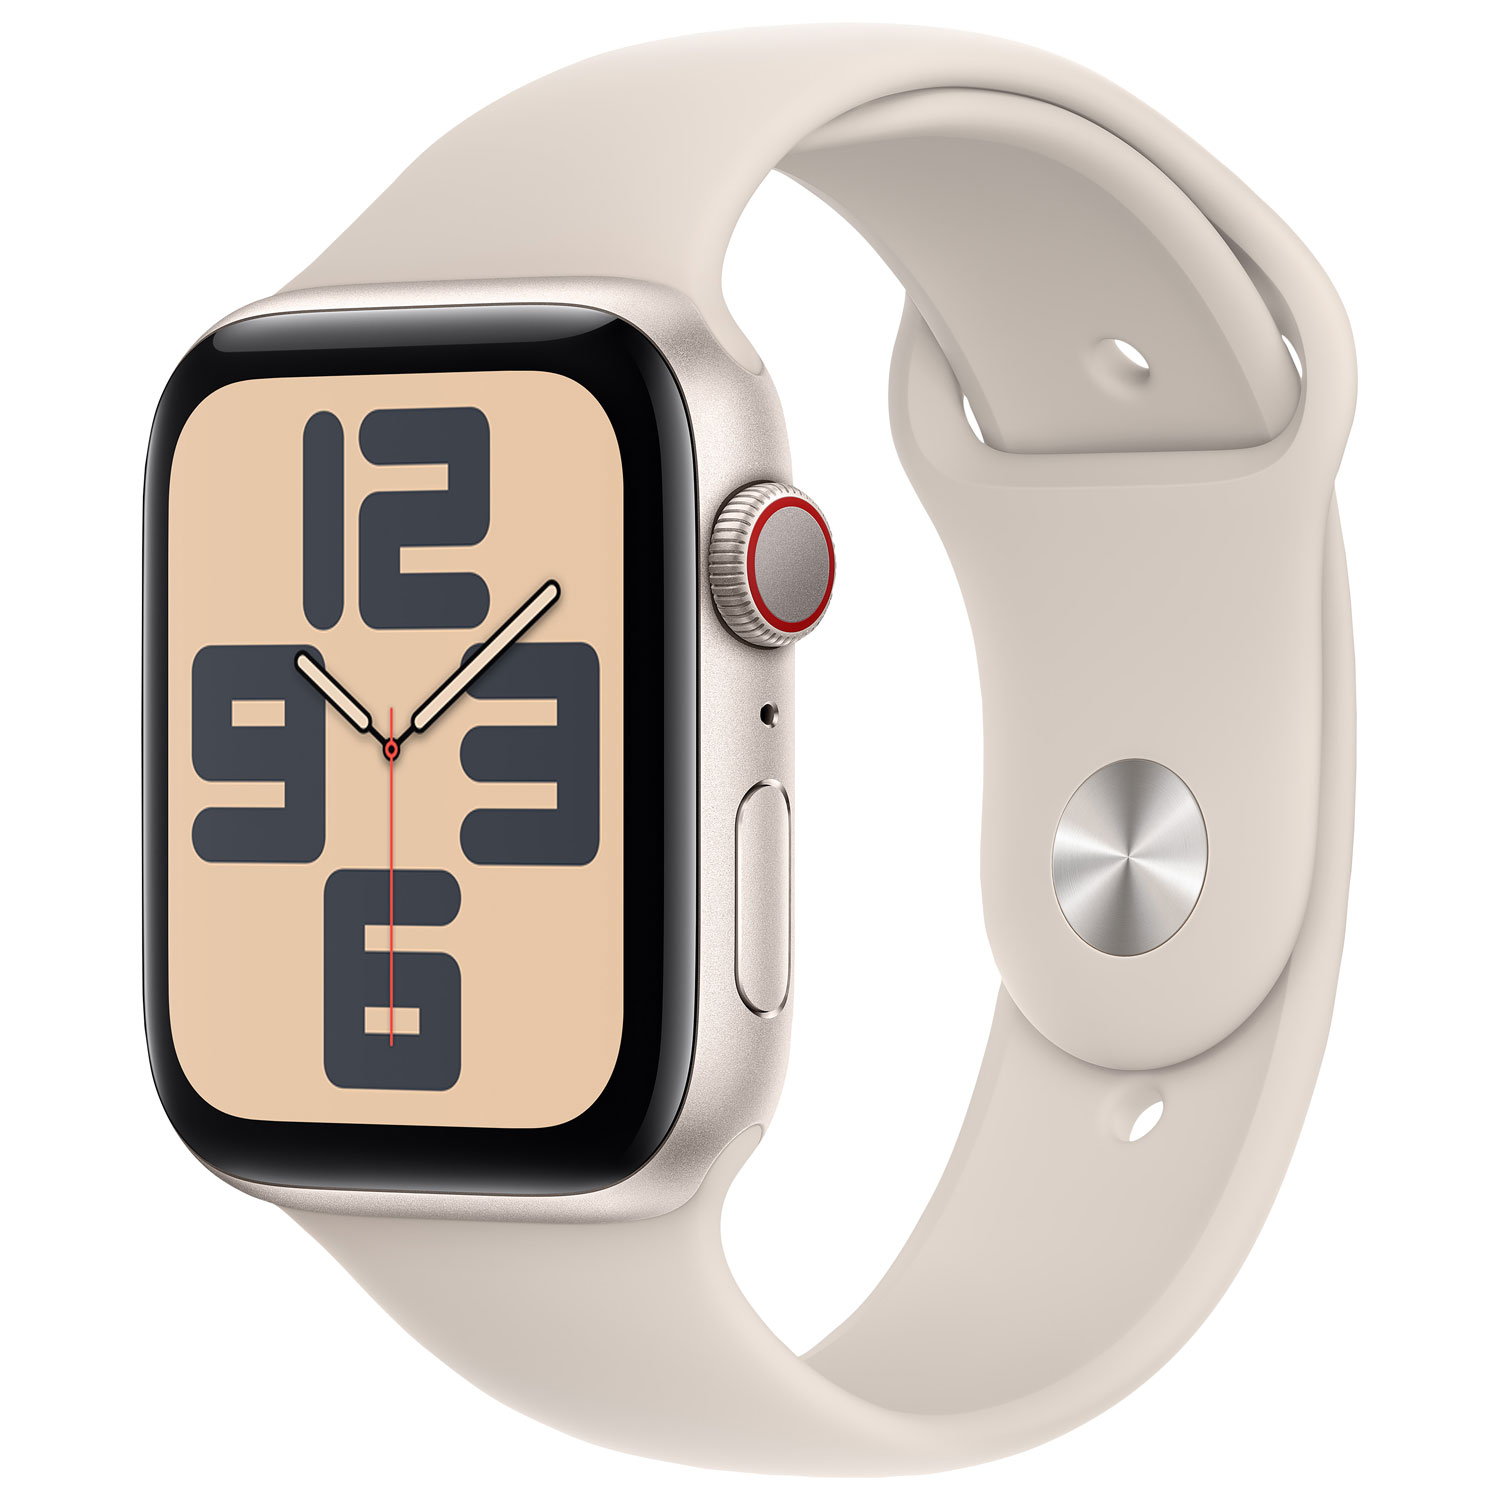 Rogers Apple Watch SE (GPS + Cellular) 44mm Starlight Aluminum Case w/Starlight Sport Band - S/M - Monthly Financing